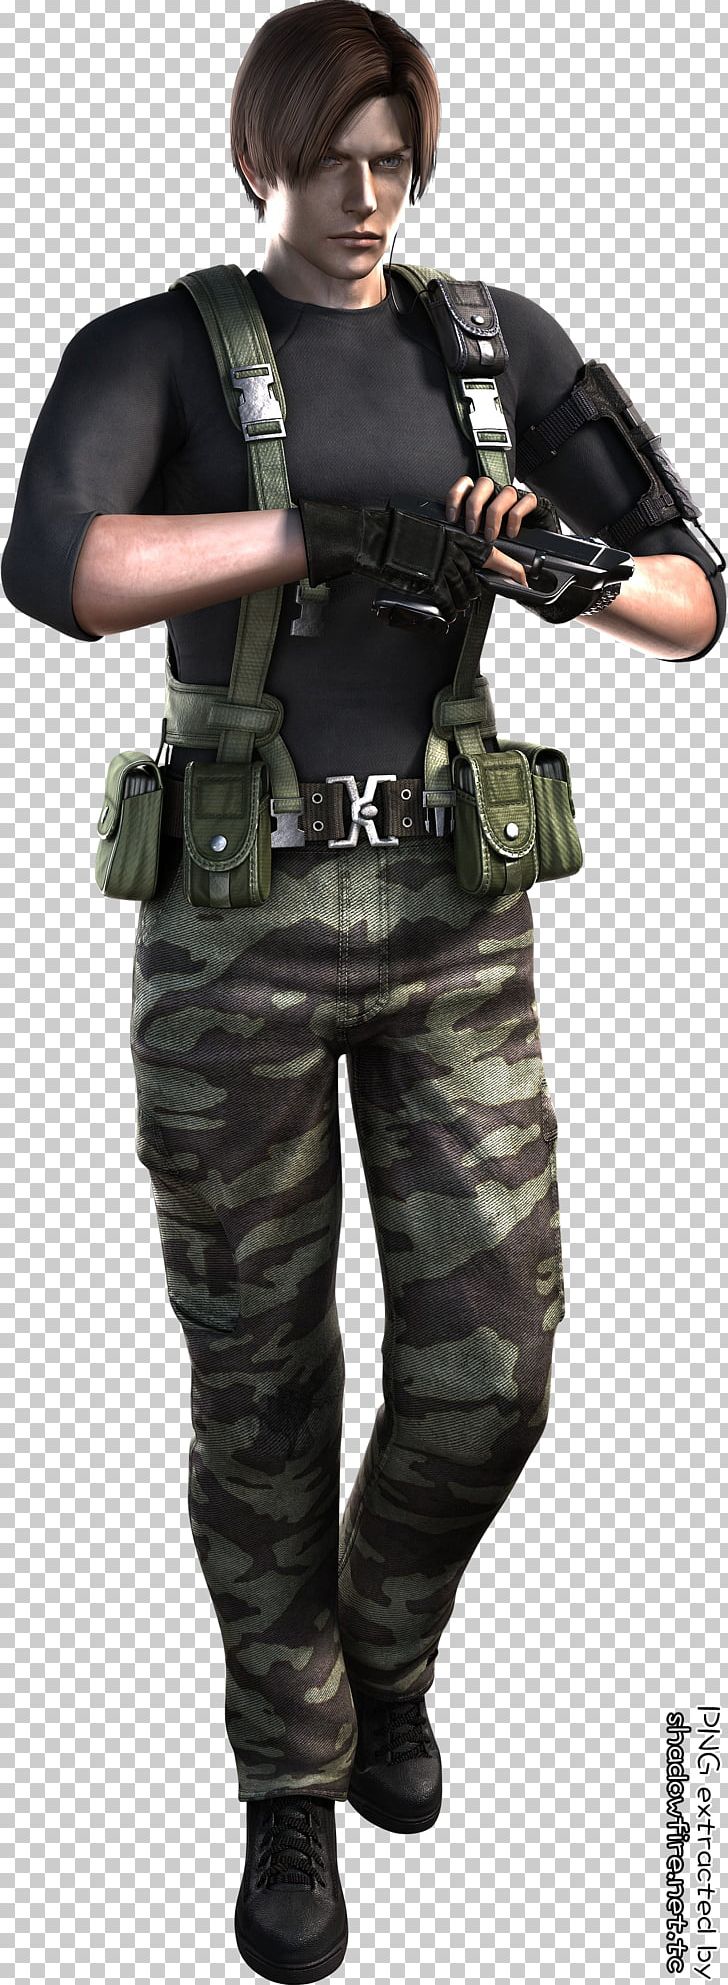 Resident Evil: The Darkside Chronicles Resident Evil 6 Resident Evil 4 Resident Evil 2 Resident Evil: Operation Raccoon City PNG, Clipart, Army, Claire Redfield, Costume, Mercenary, Military Police Free PNG Download